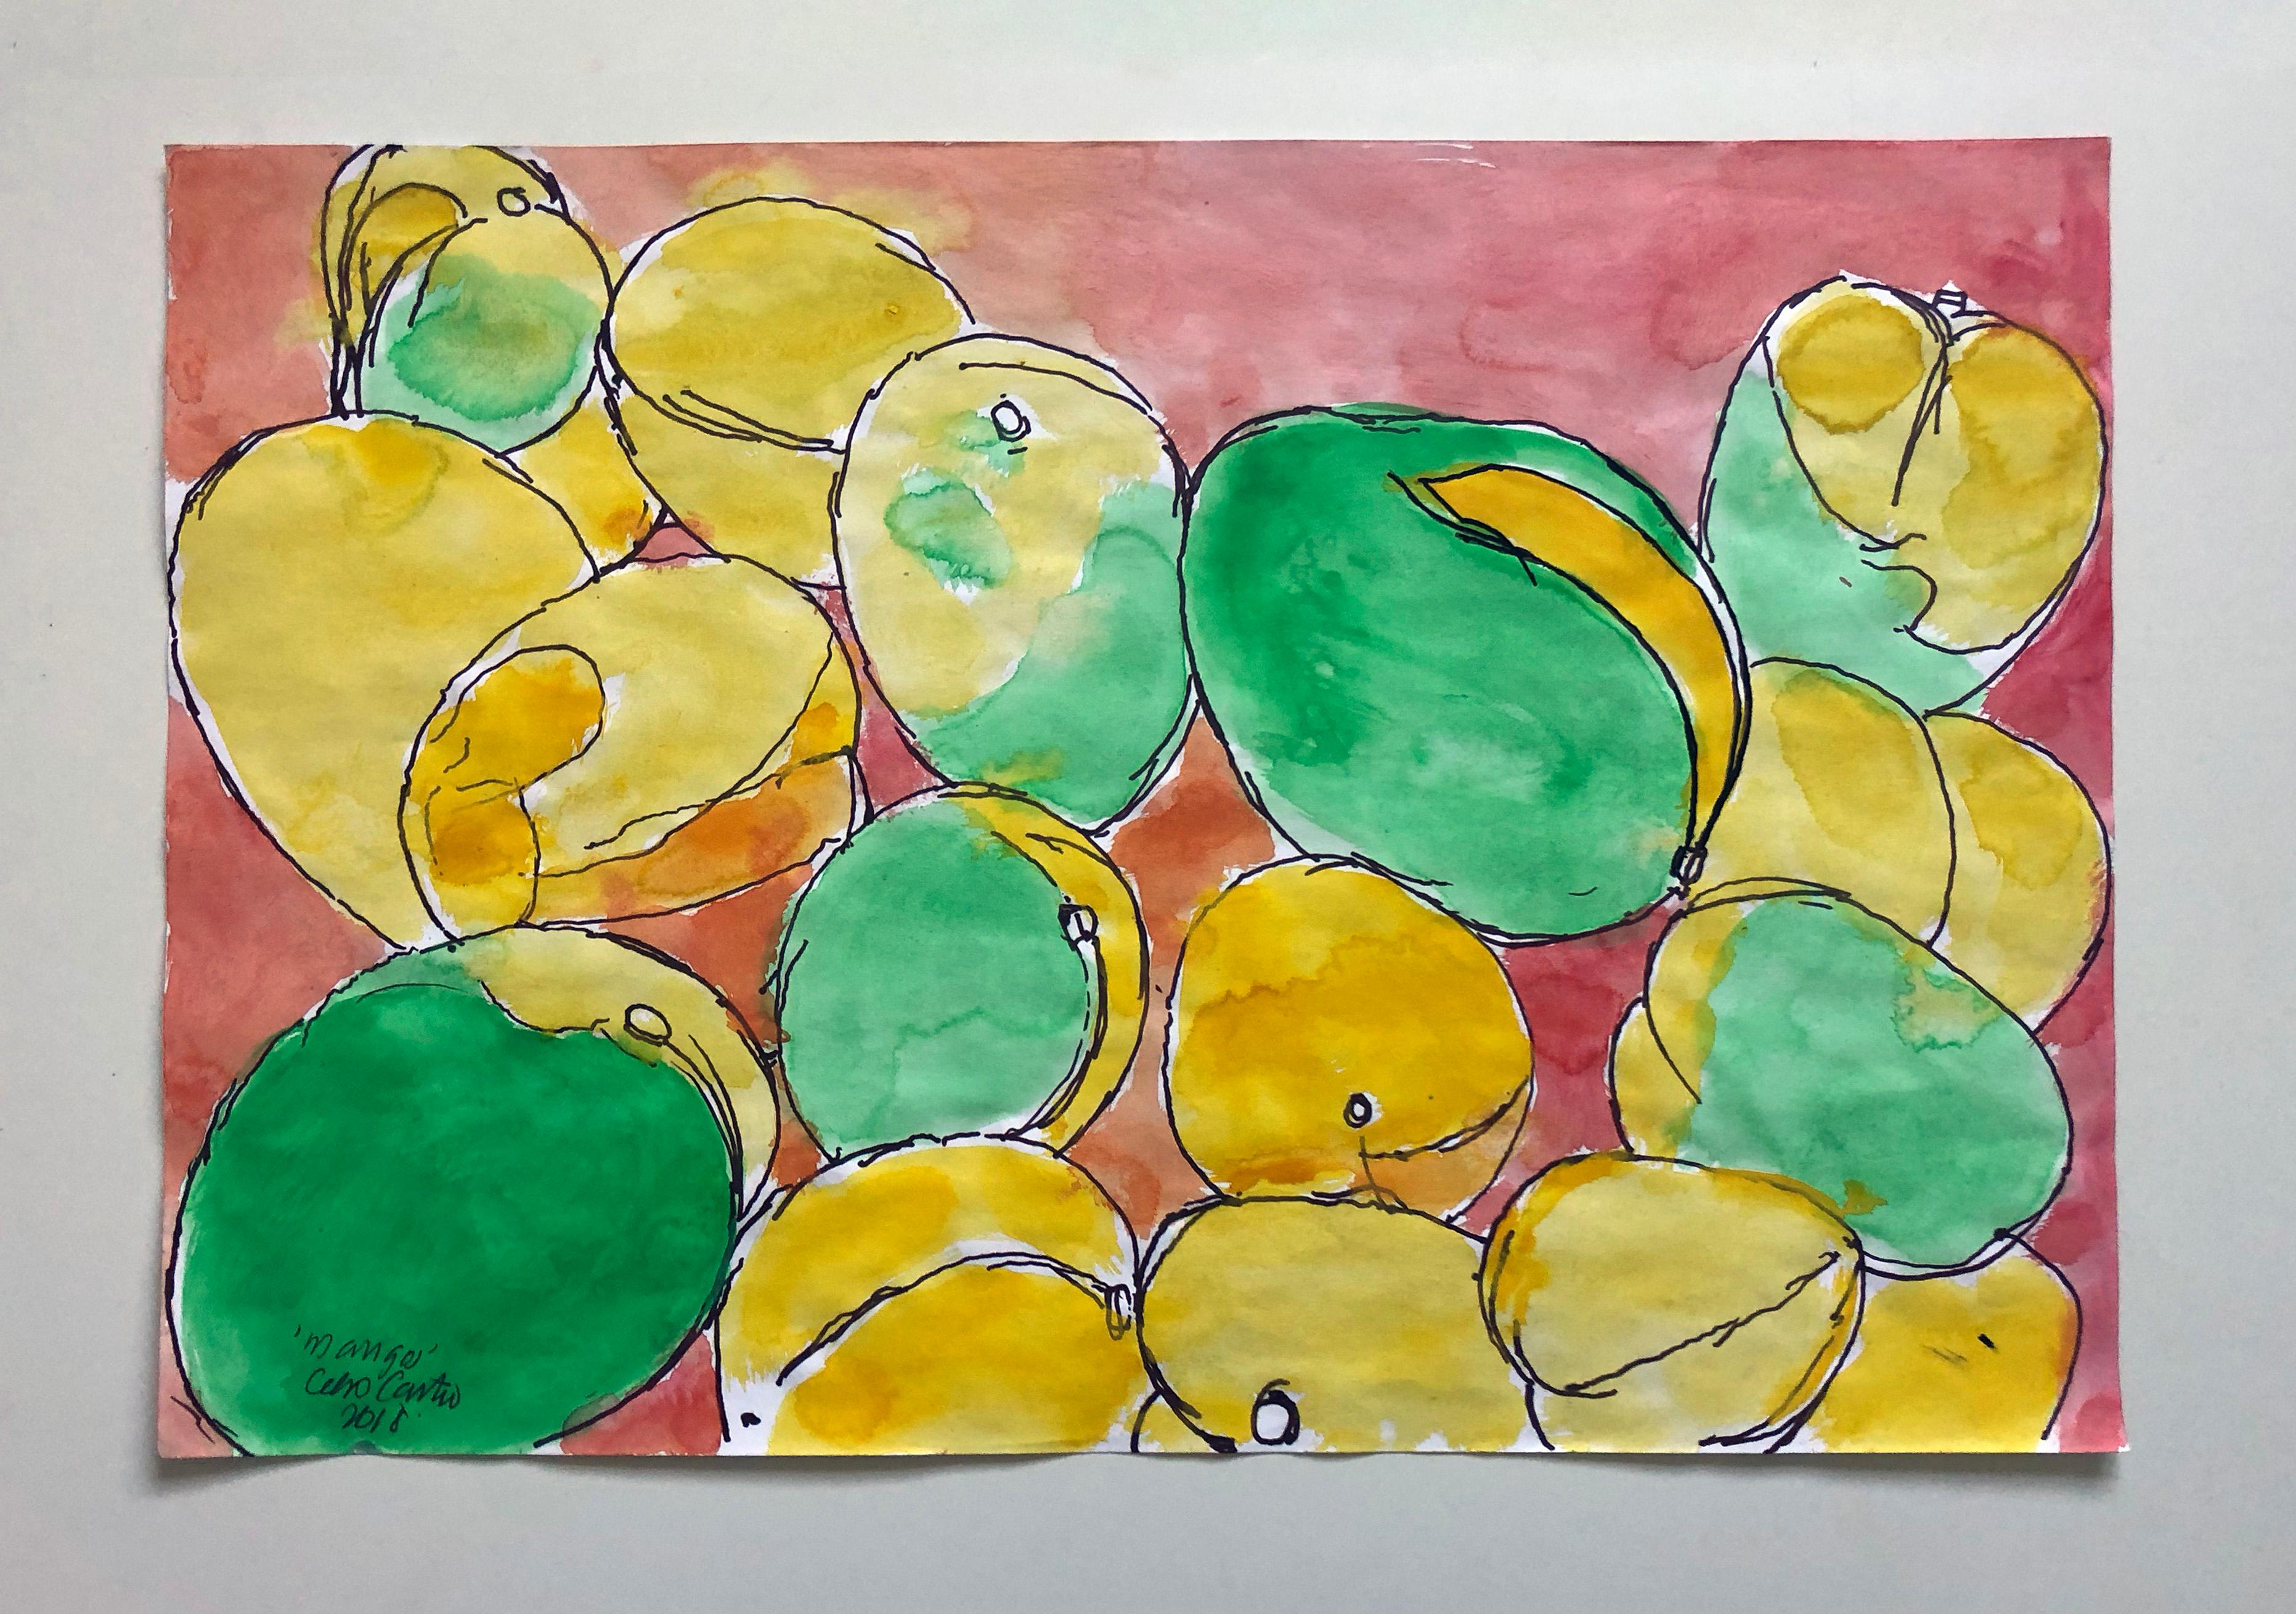 Other Mangos, Watercolor and Ink on Archival Paper, Diptych, 2018